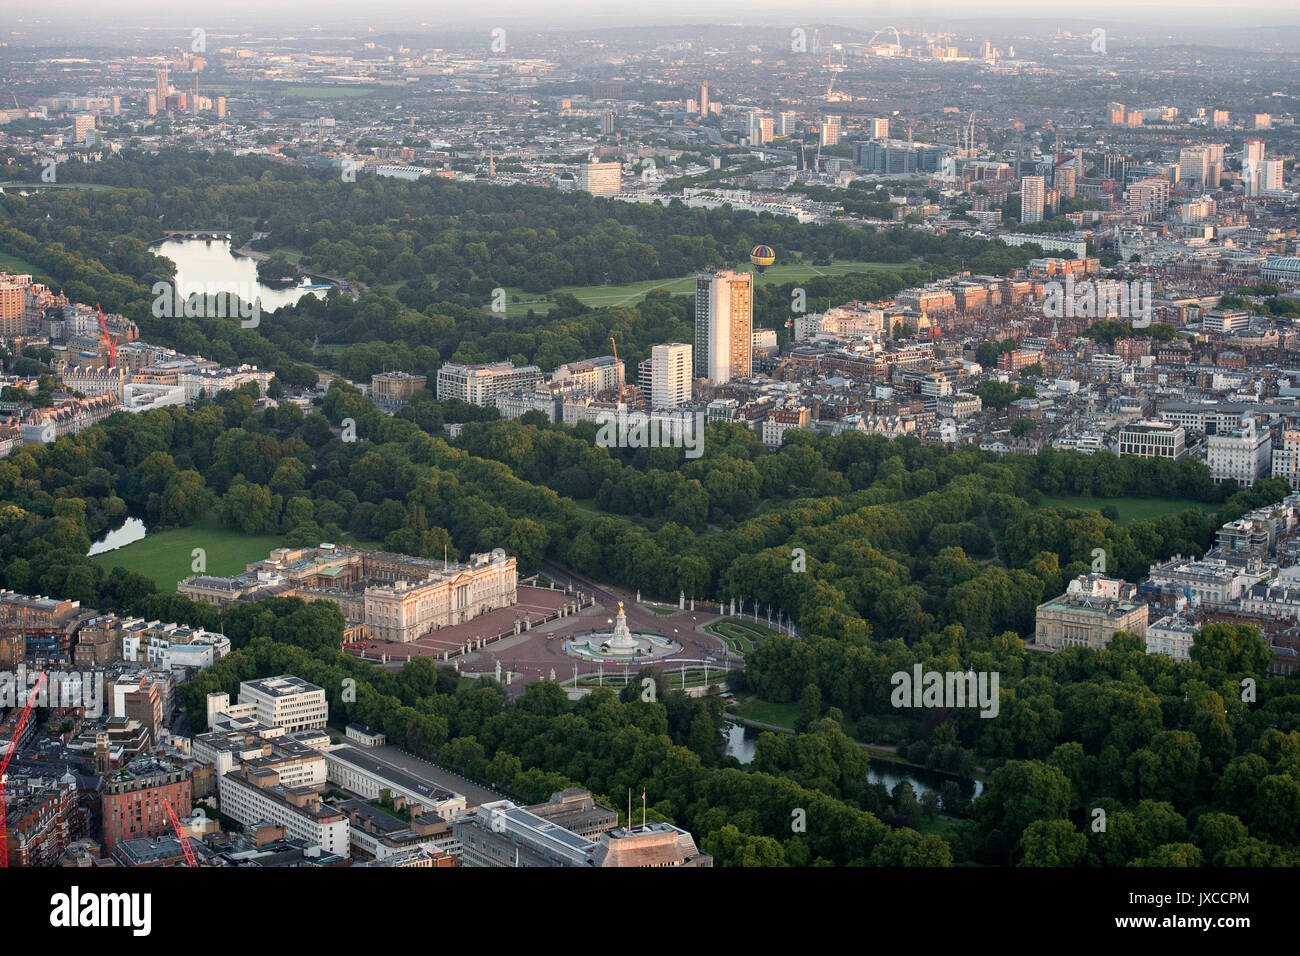 General aerial view of Buckingham Palace, Green Park, Hyde Park and St James's Park, London. Stock Photo